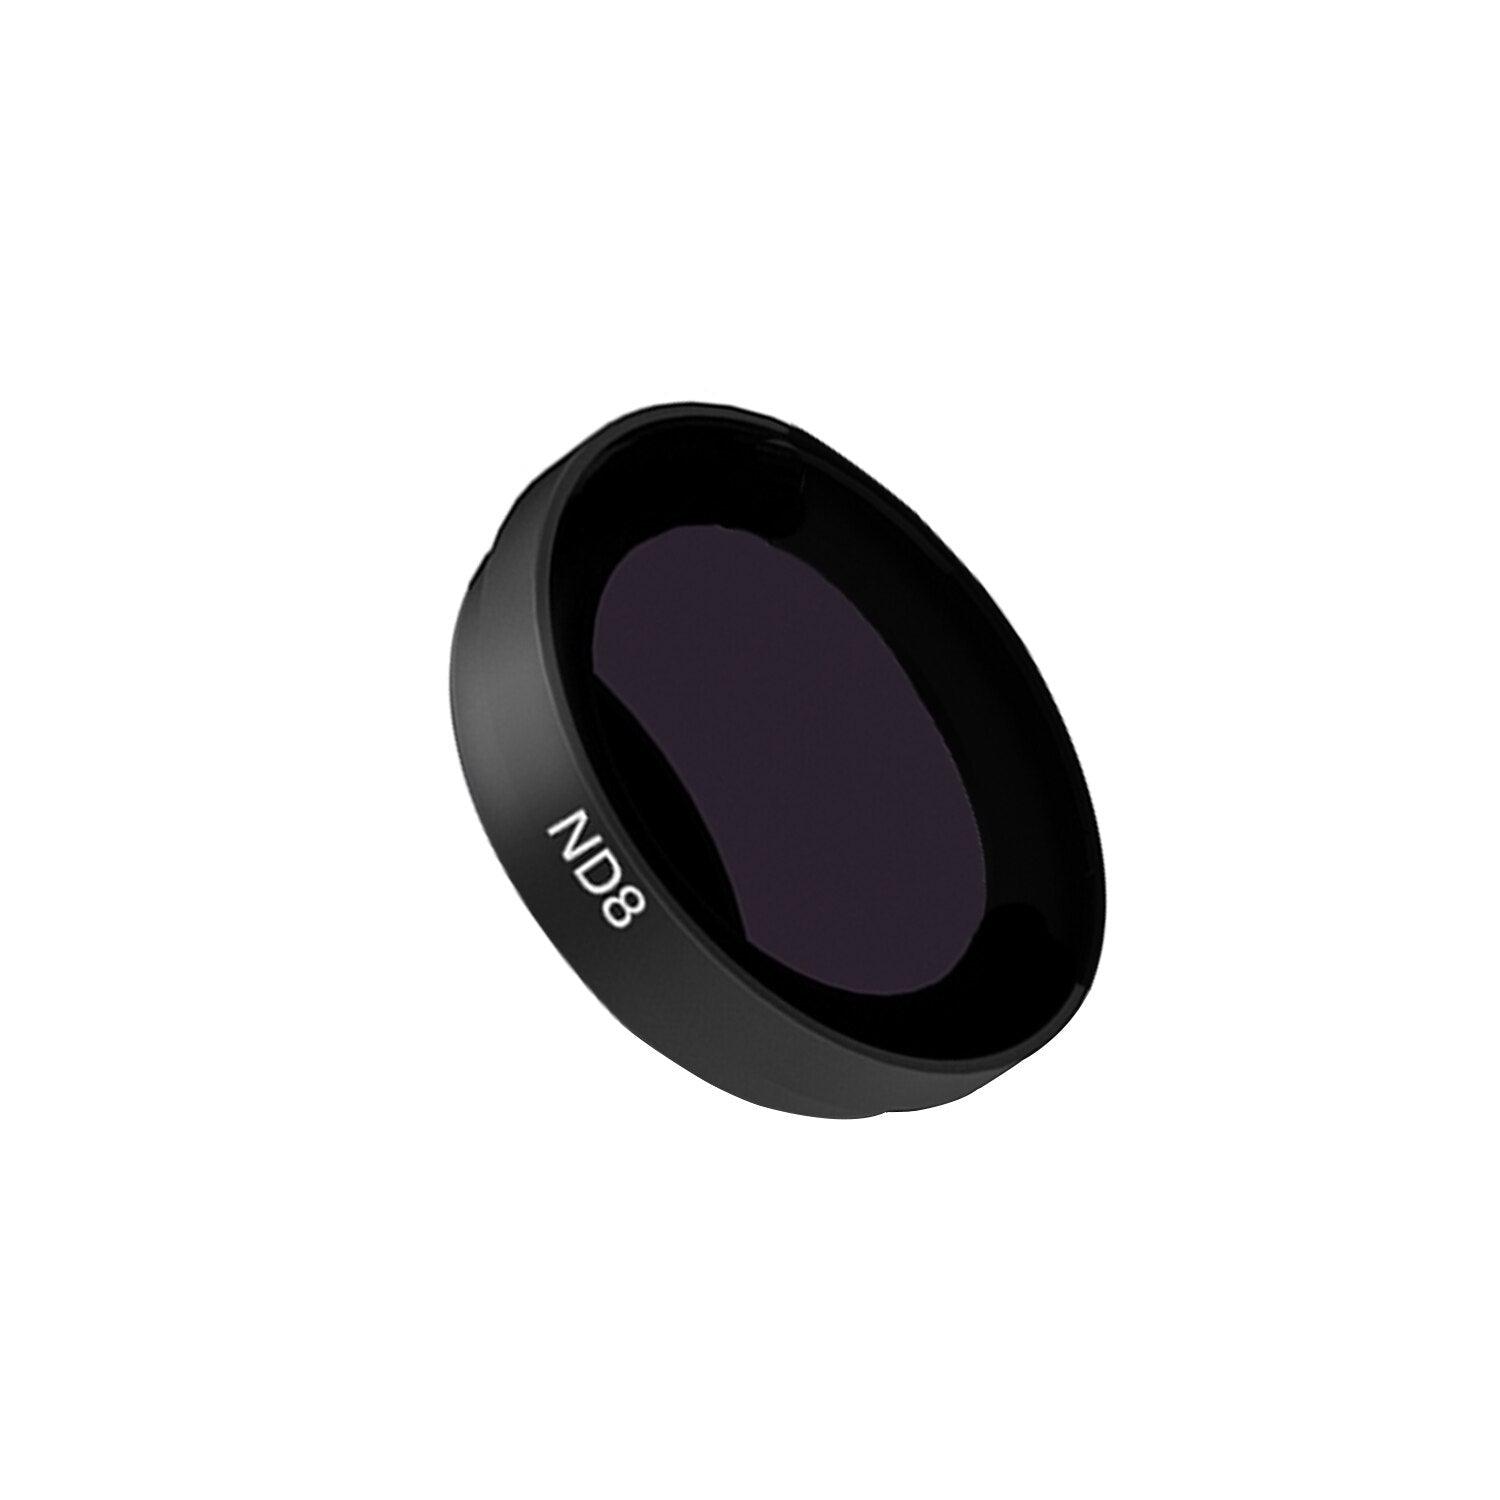 ND8 / ND16 / ND32 UV Lens Filter for CADDX Peanut Camera Lens Ratel FPV Camera Spare Part for RC Racer Drone Quadcopter CaddxFPV - RCDrone